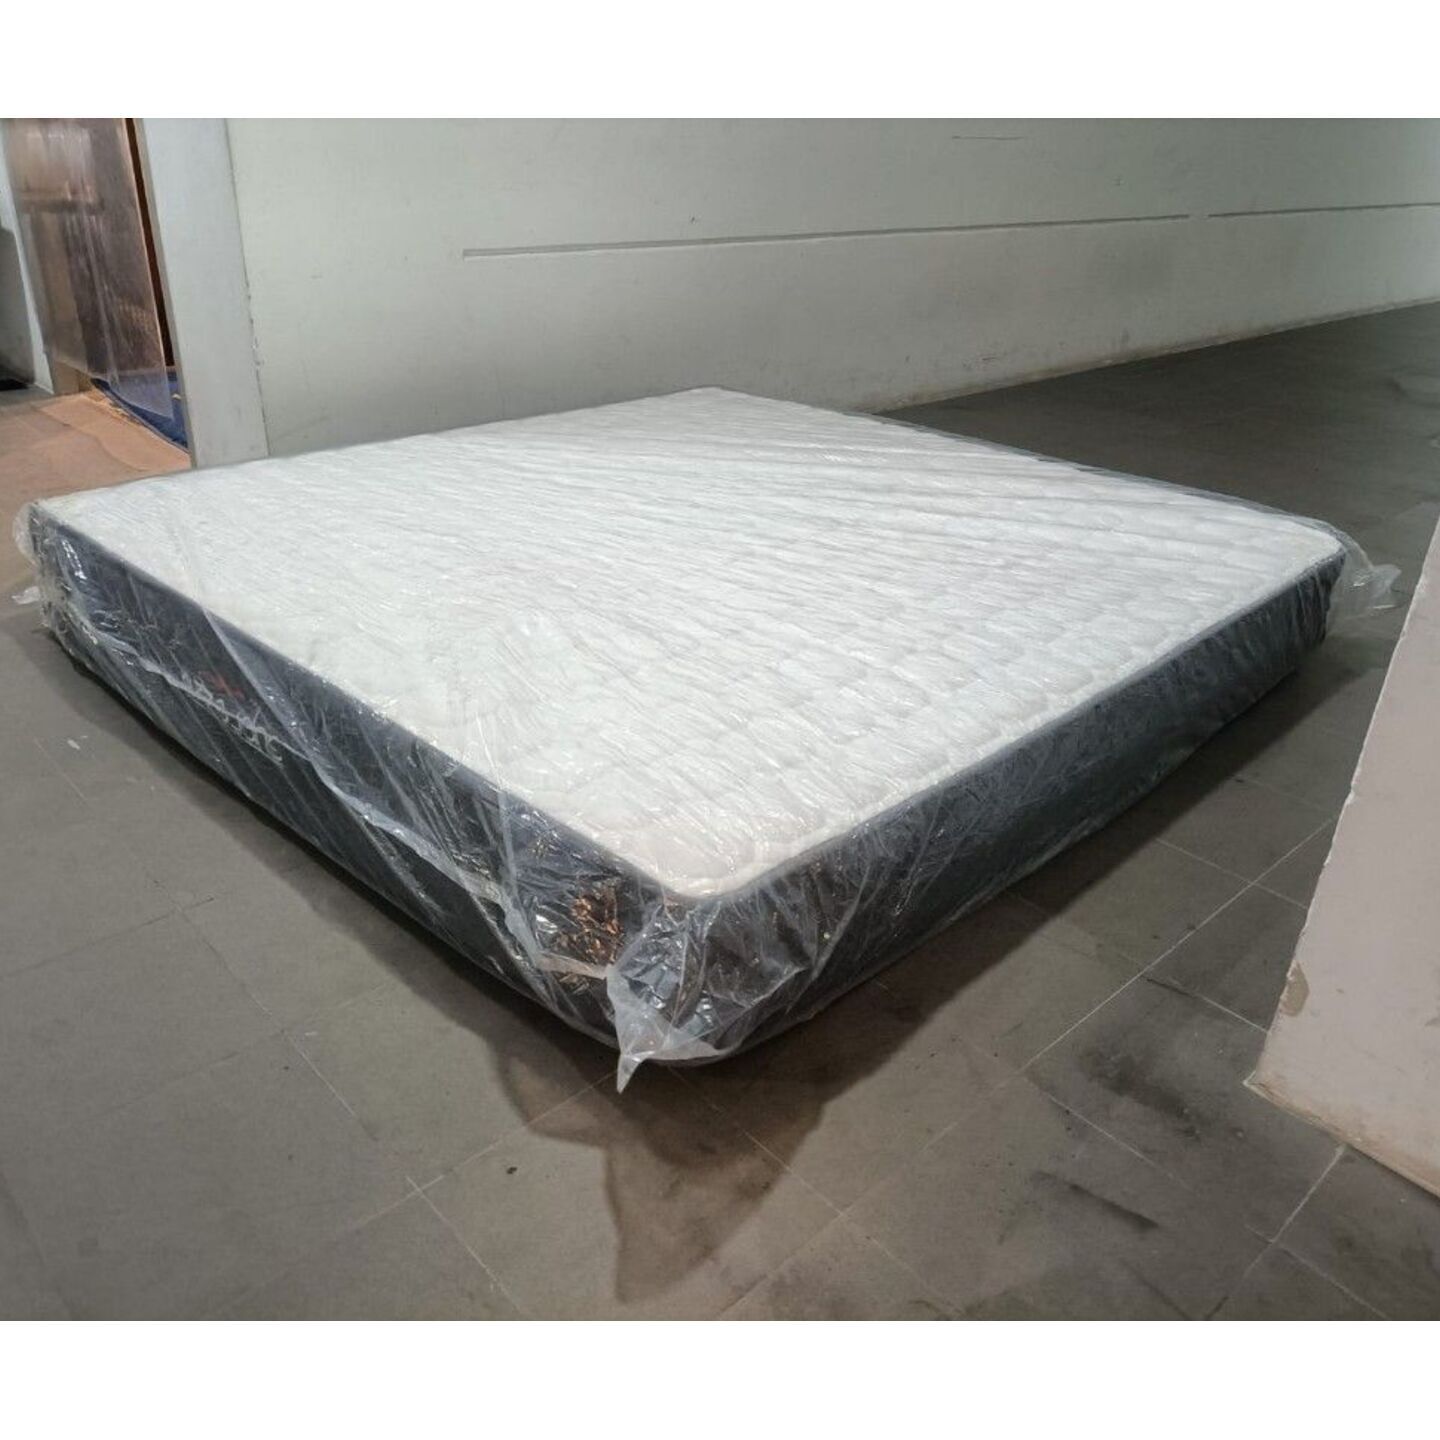 SUPREZZA II King Size Pocketed Spring Mattress with Pillow Top